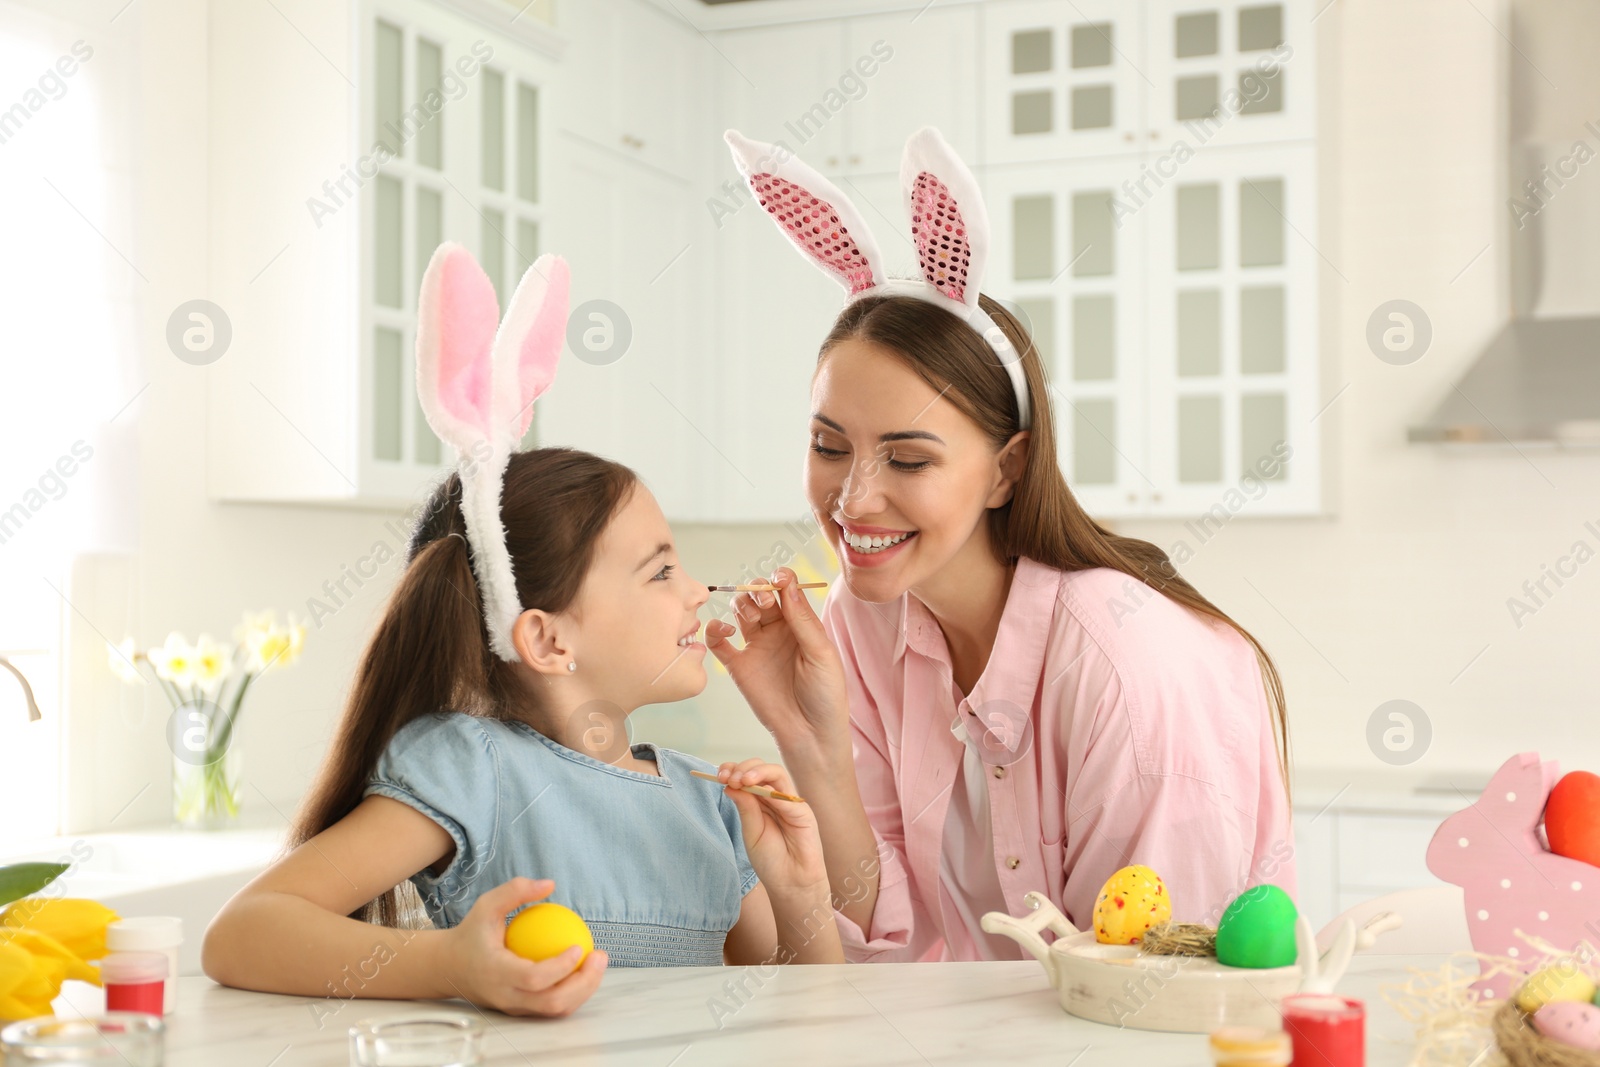 Photo of Happy mother and daughter with bunny ears headbands having fun while painting Easter egg in kitchen